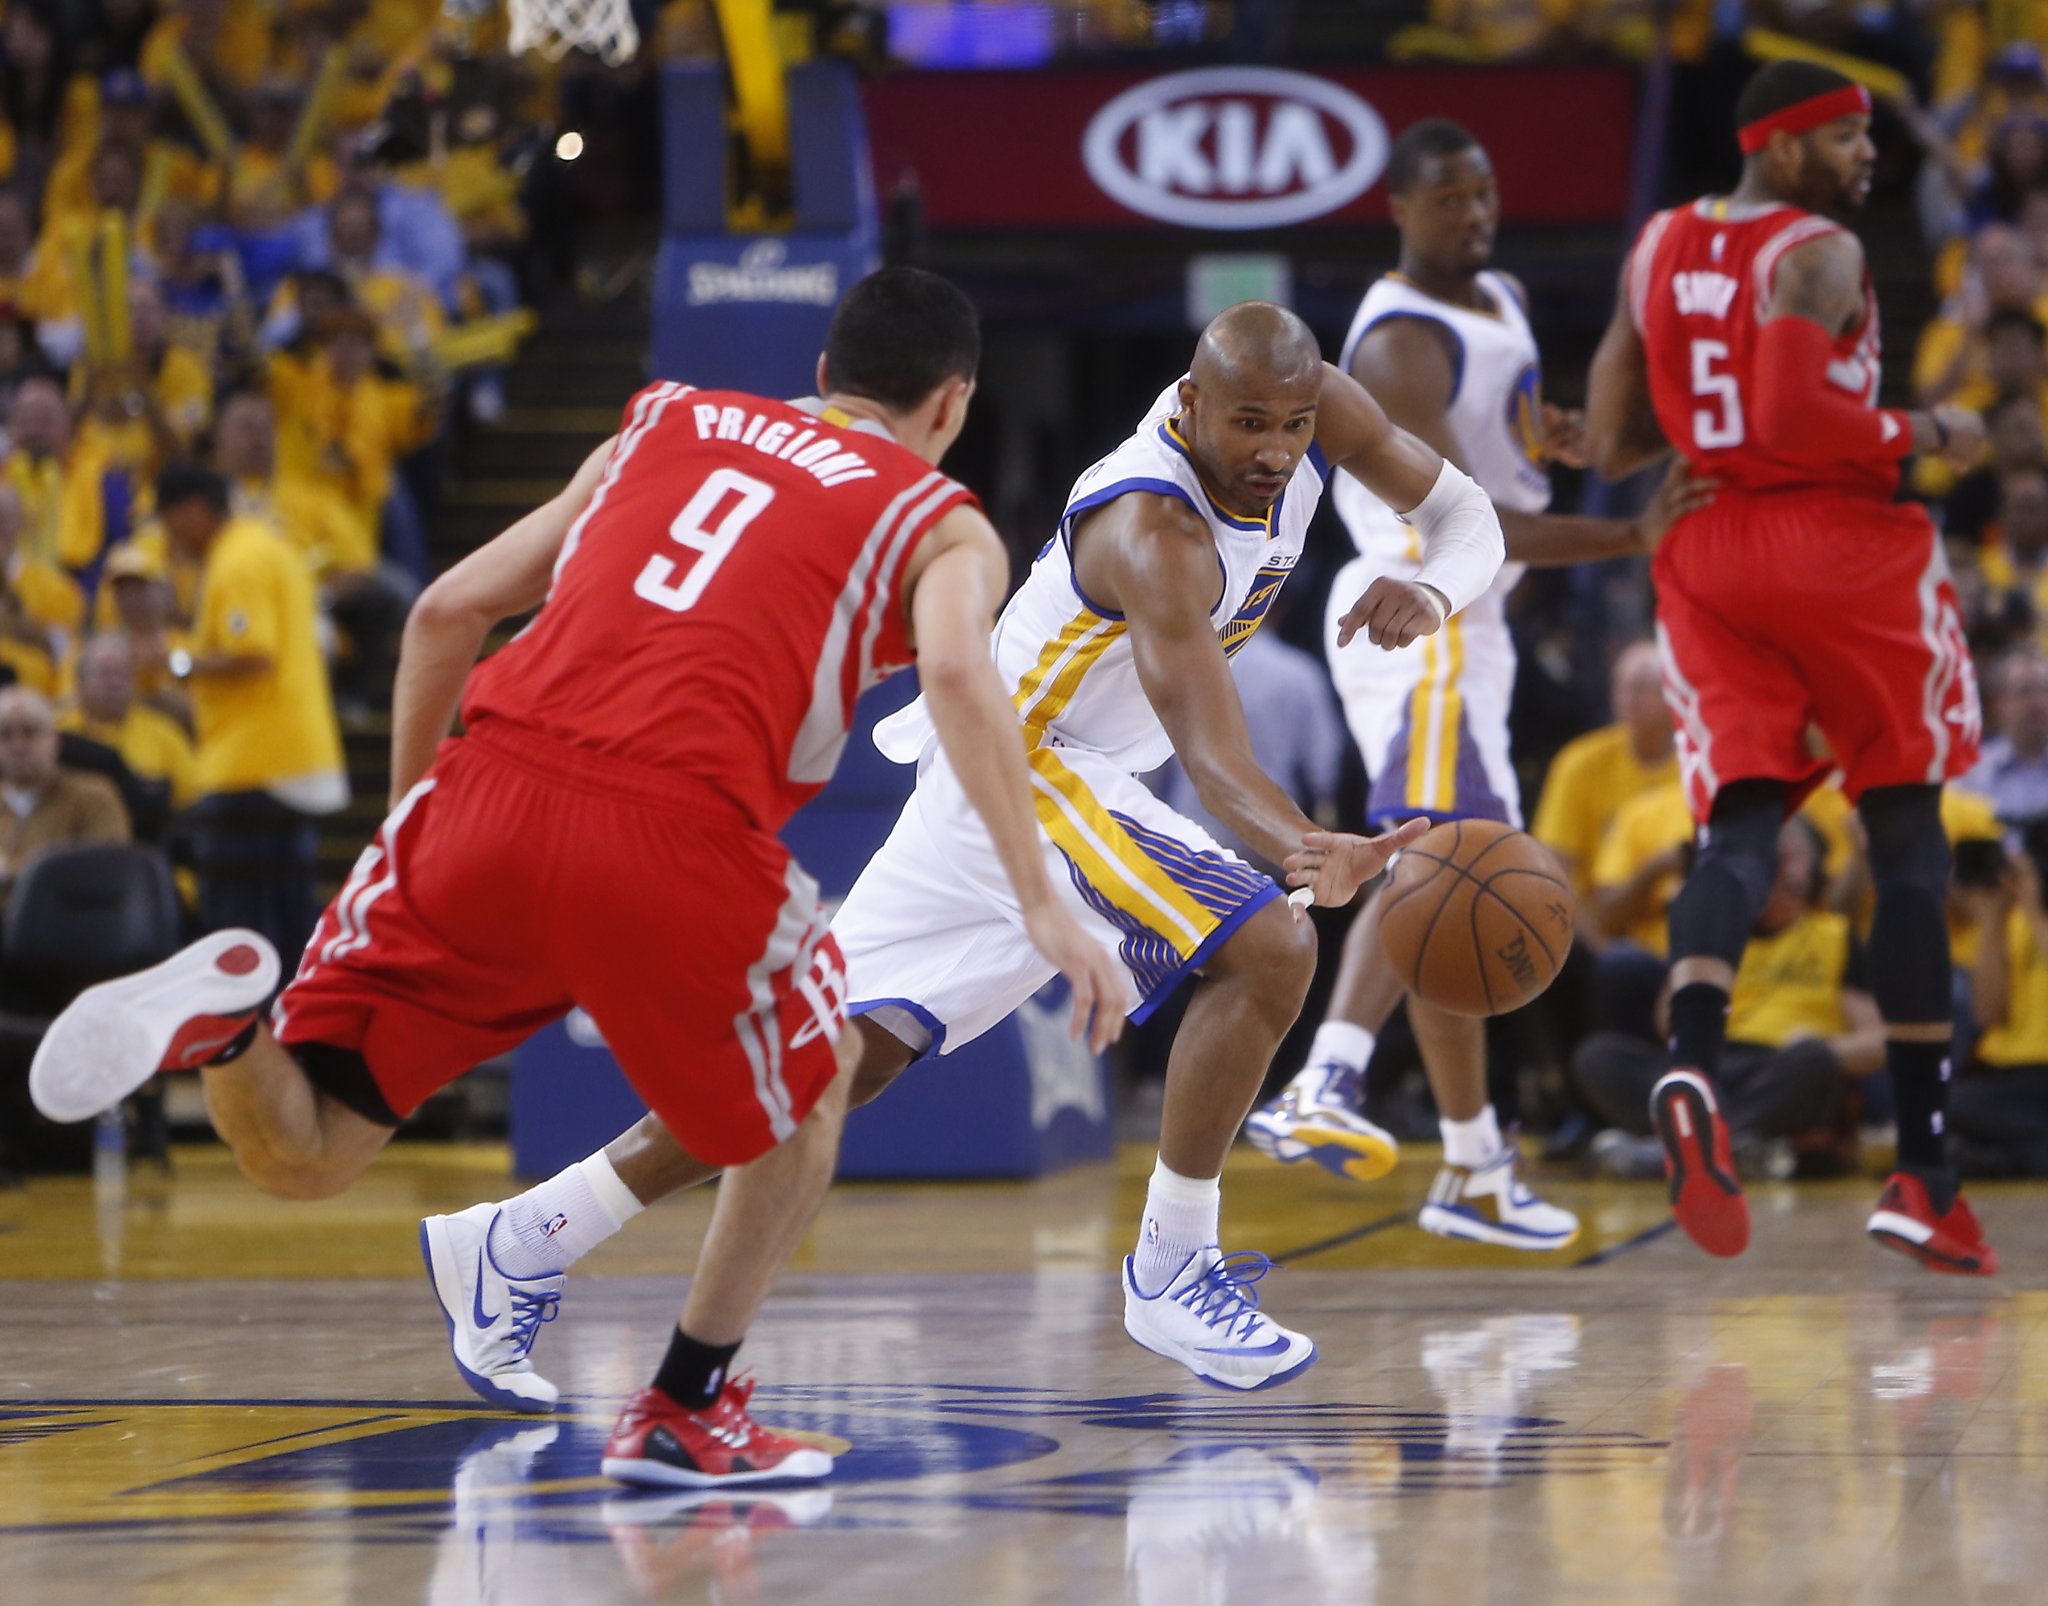 Warriors: Leandro Barbosa reveals he was close to playing this season